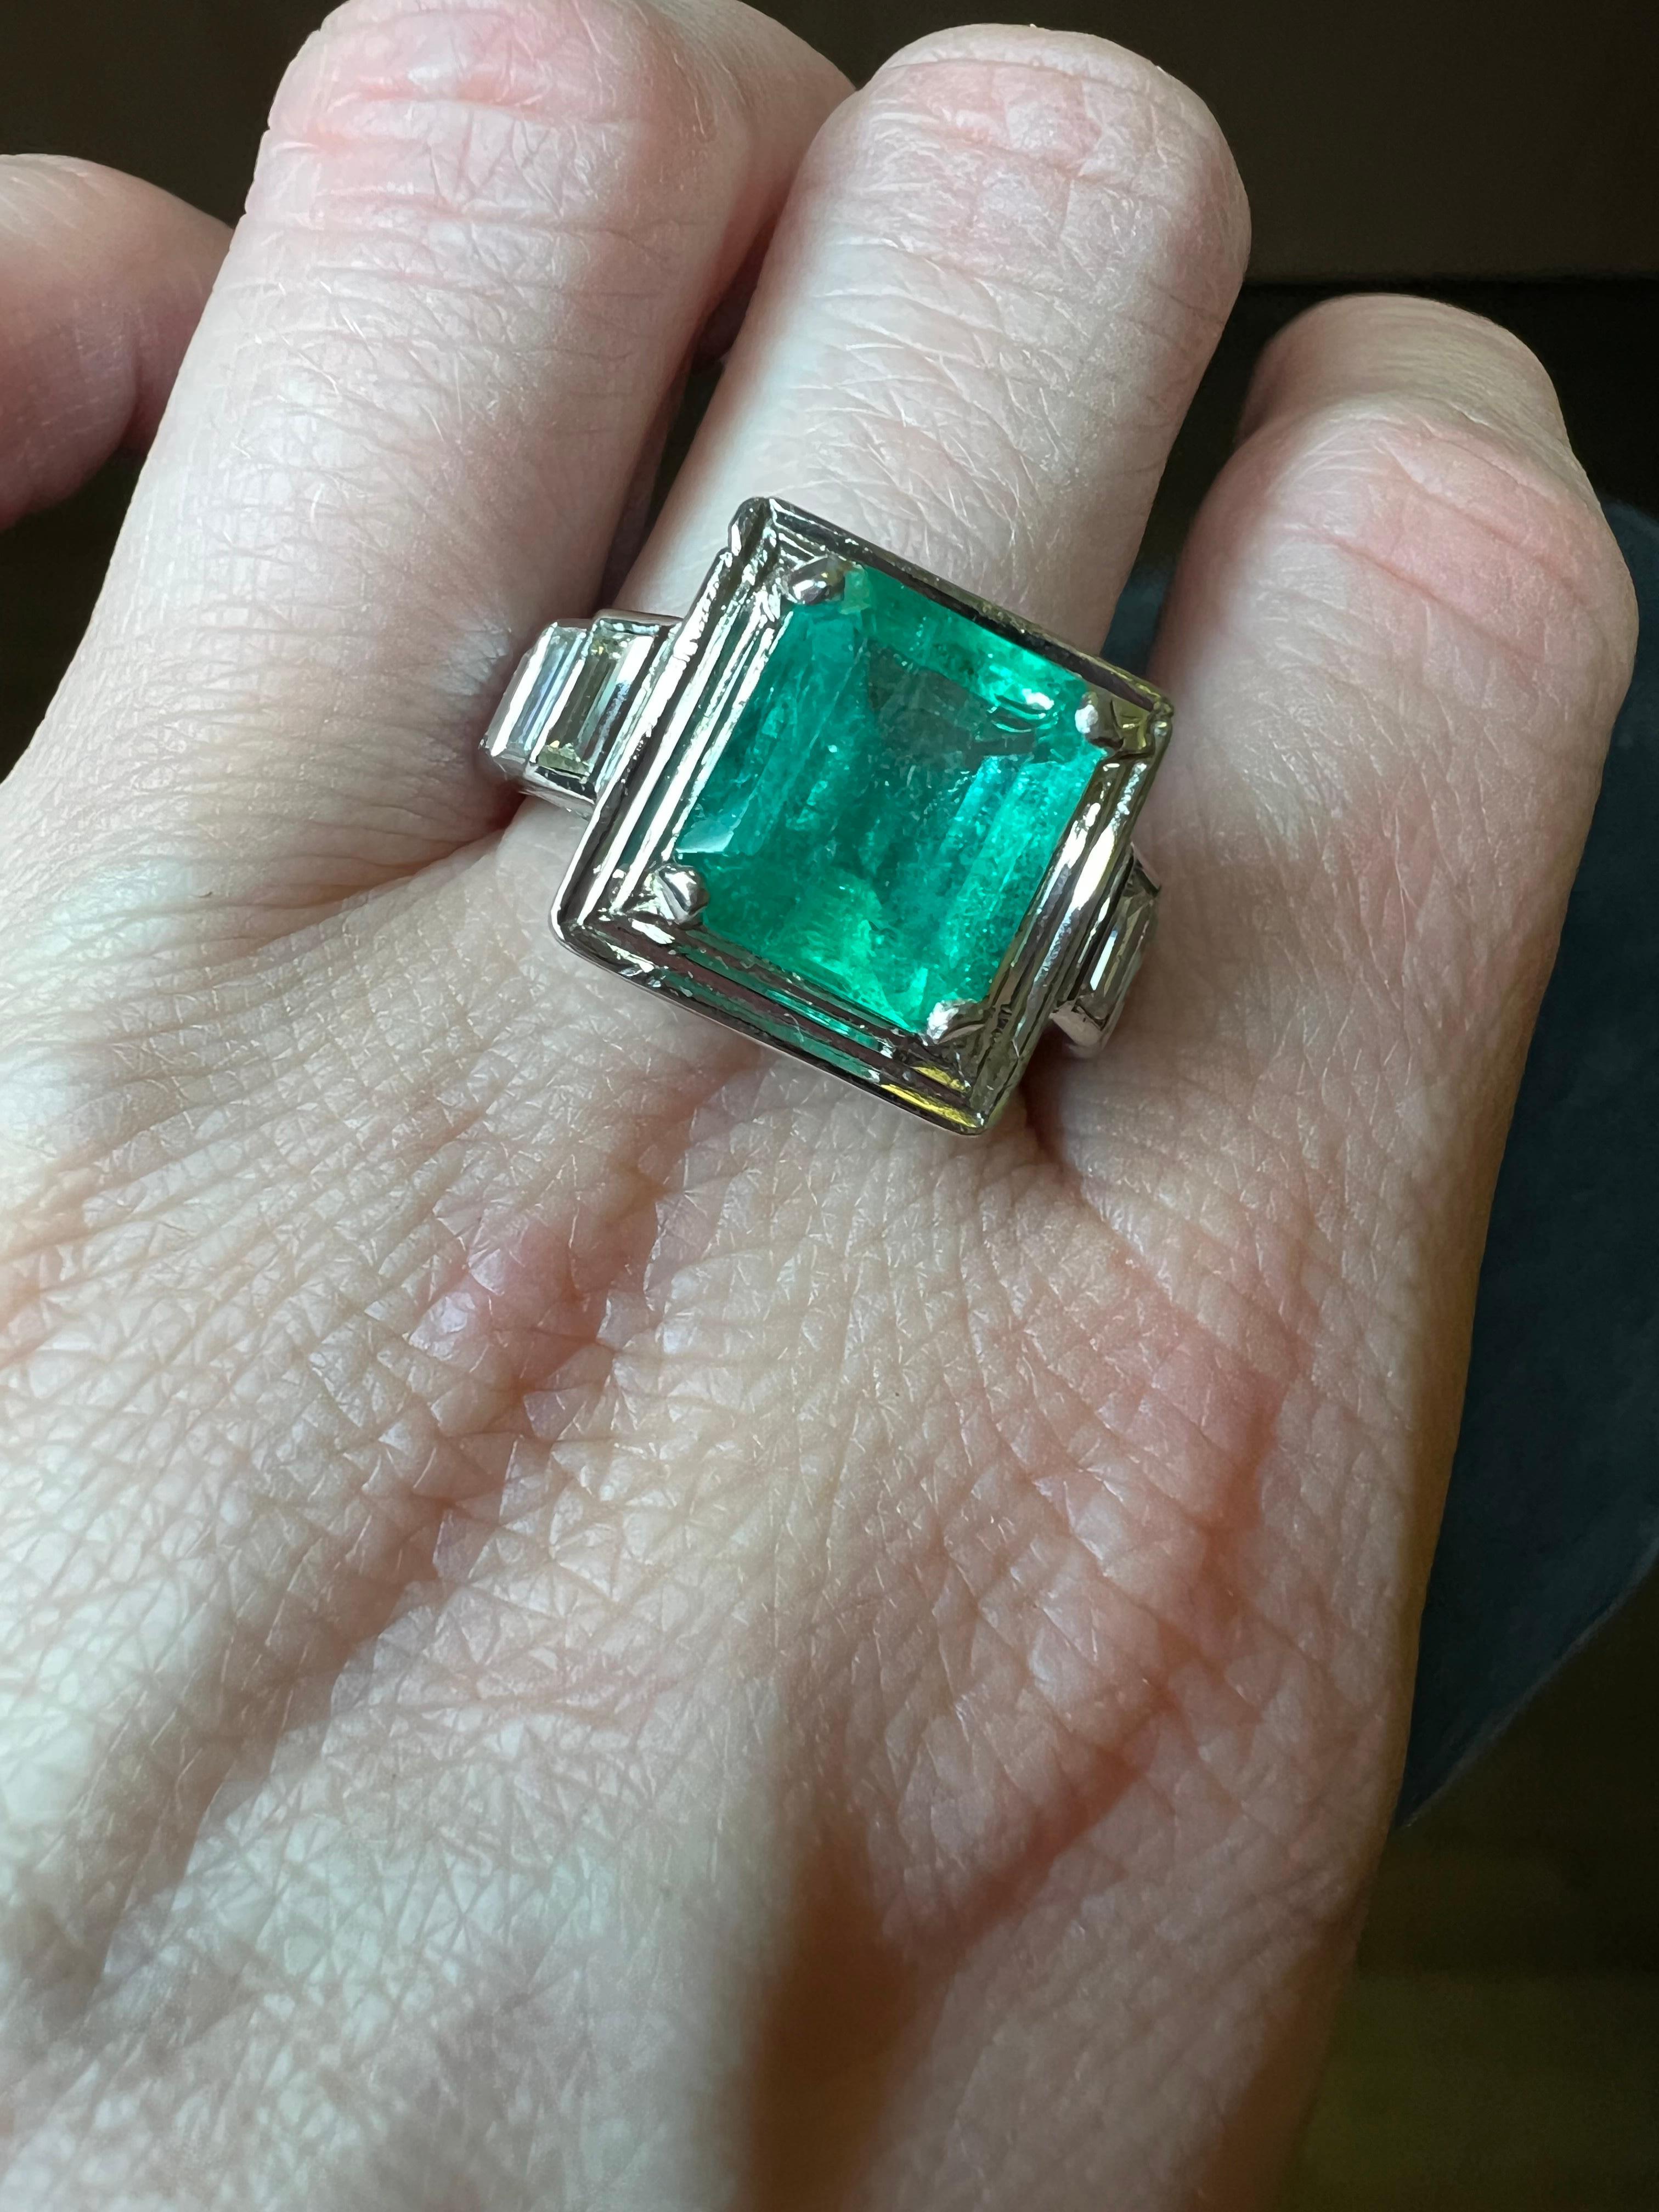 18kt white gold ladies ring with natural 4.20-carat Colombian emerald and diamonds.
Comes with GCS Certificate

Dimensions - 
Weight : 9.5 grams
Finger Size (UK) = O (US) = 7 1/2 (EU) = 55 1/4
Size : 3.9 x 2.3 x 1.5 cm

Emerald - 
Cut :